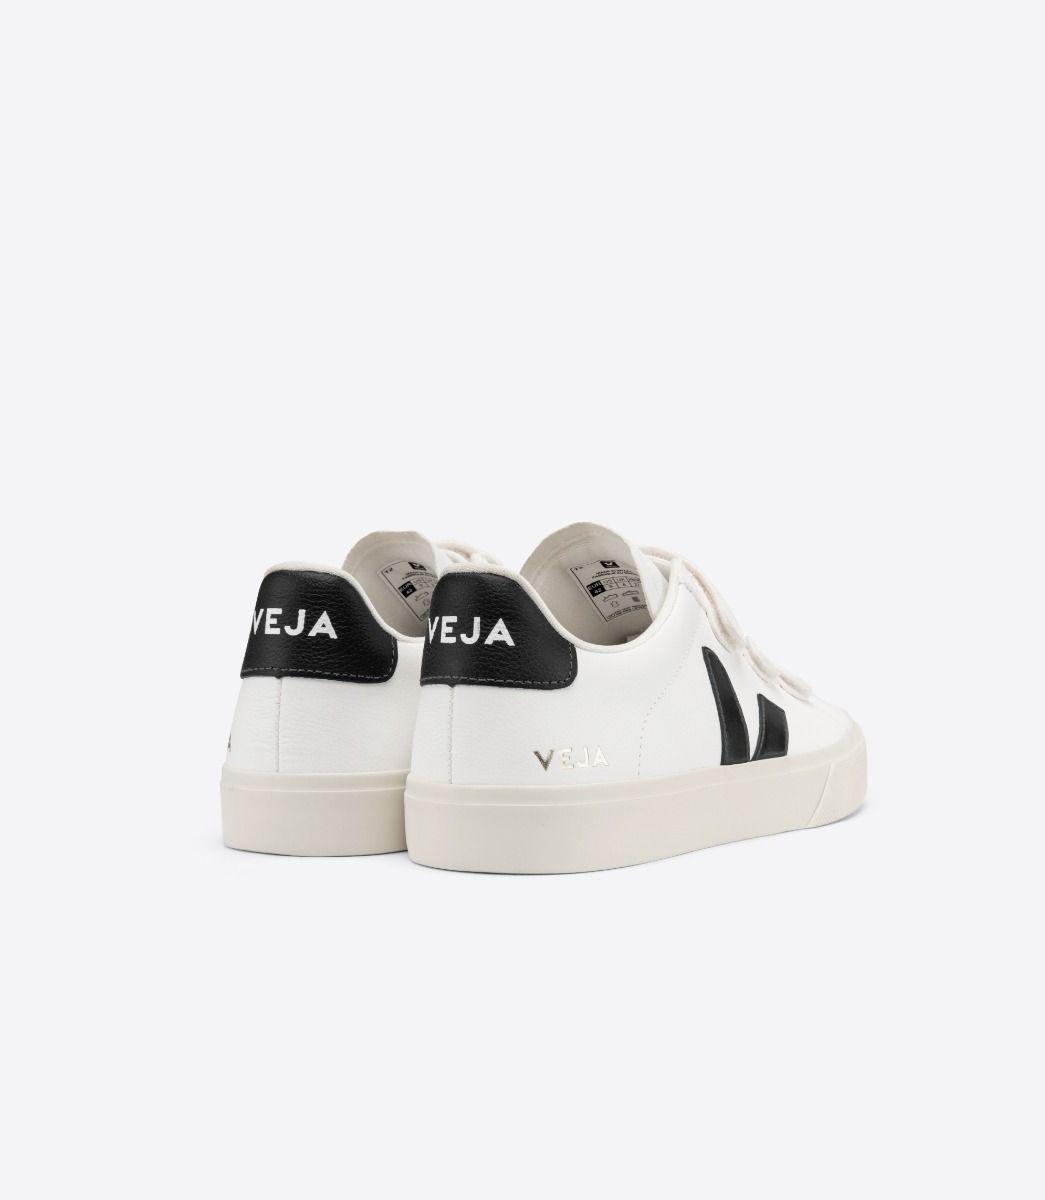 Veja Sneakers Recife Chfree leather white black